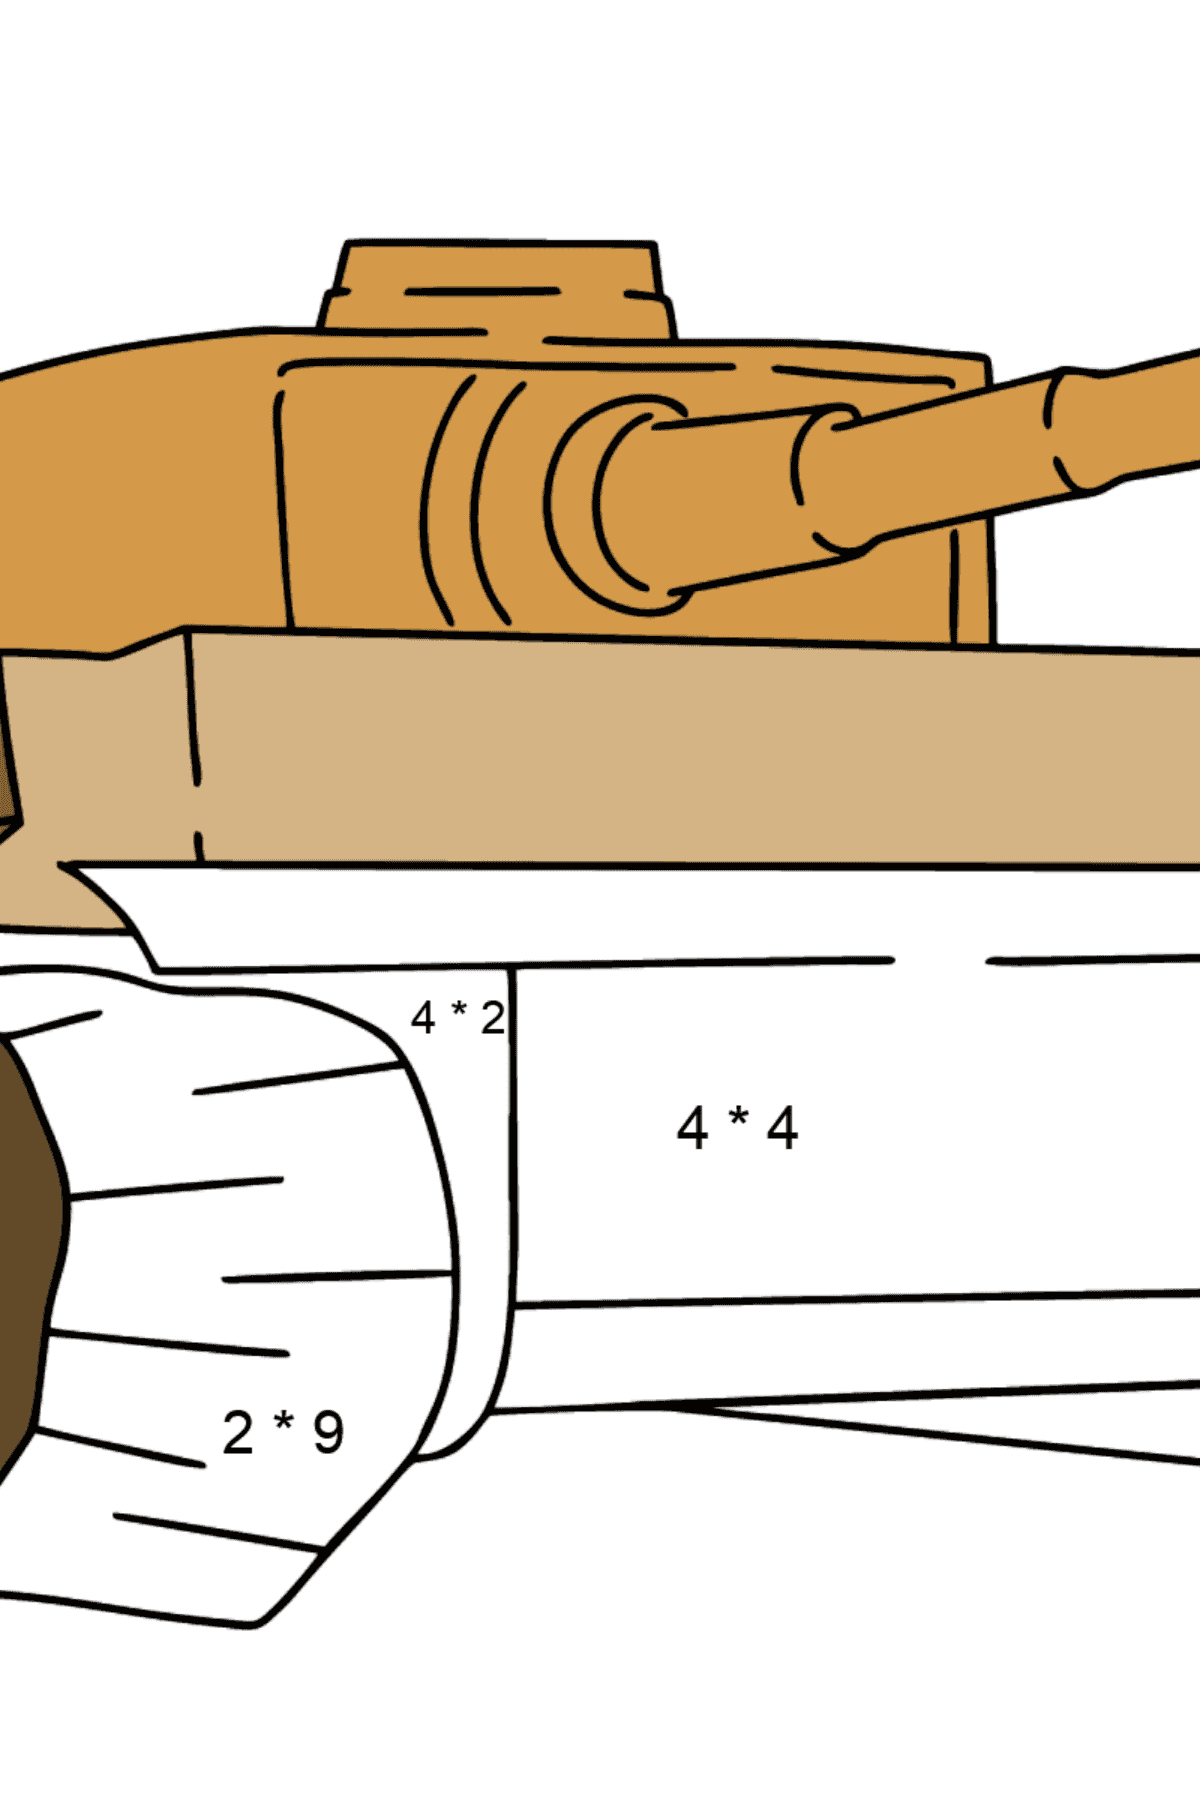 Tank Tiger coloring page - Math Coloring - Multiplication for Kids